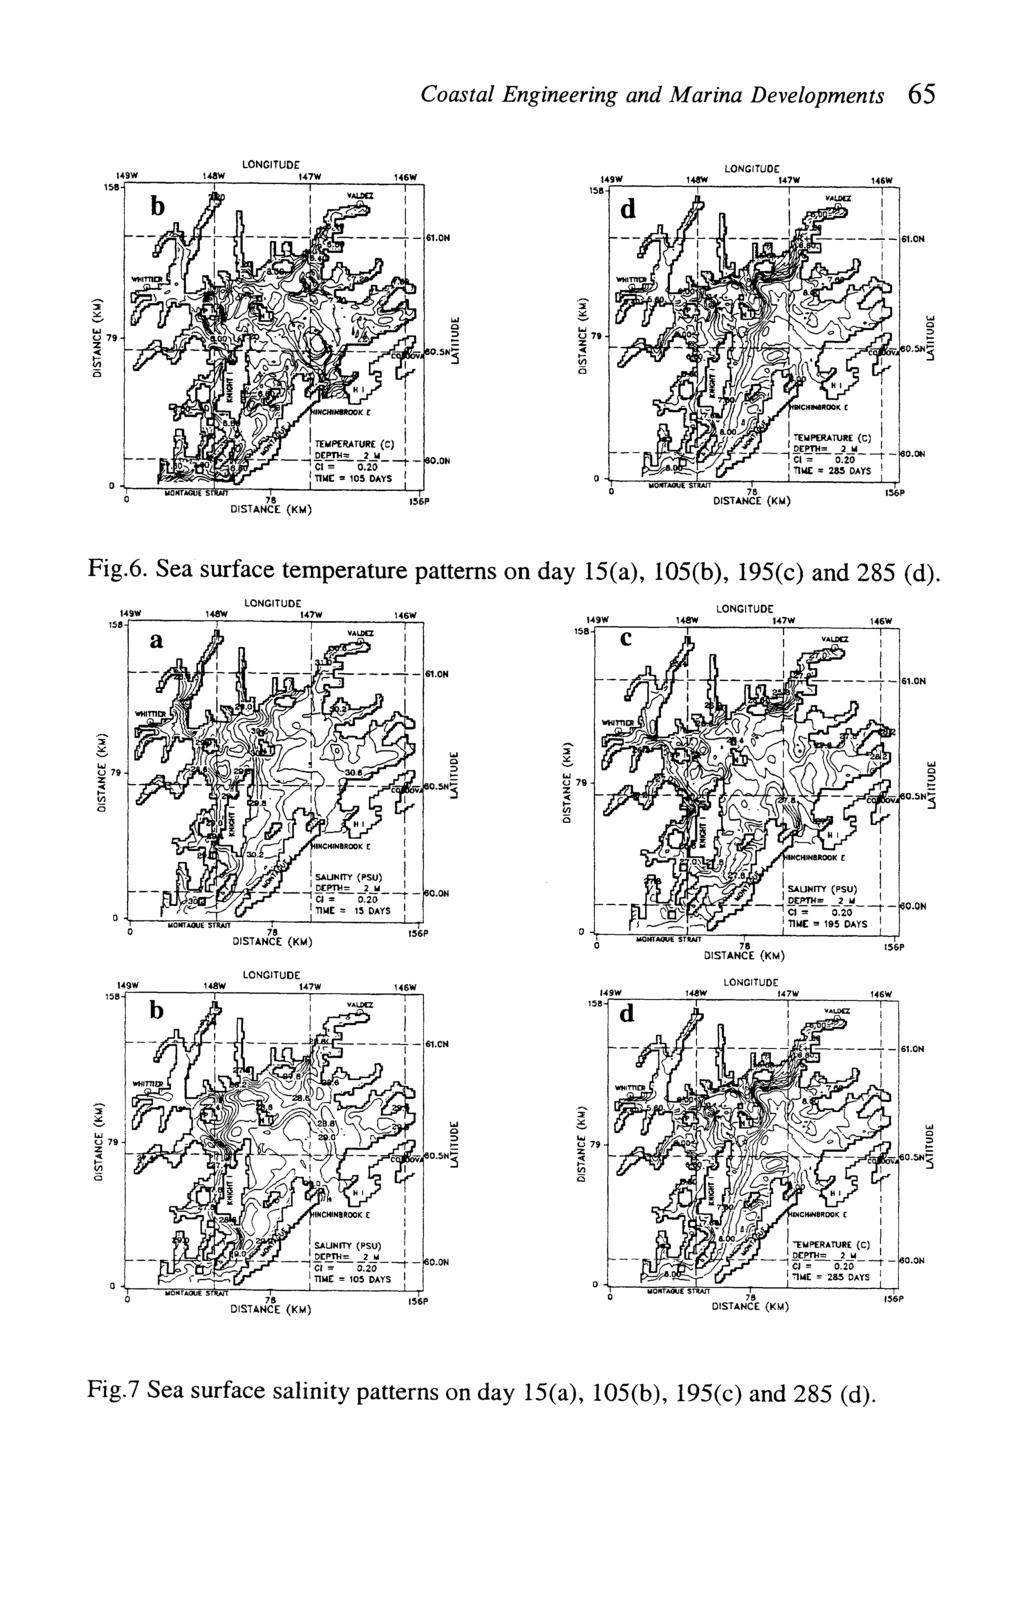 Coastal Engineering and Marina Developments 65 DISTANCE (KM) Fig.6. Sea surface temperature patterns on day 15(a), 105(b), 195(c) and 285 (d).